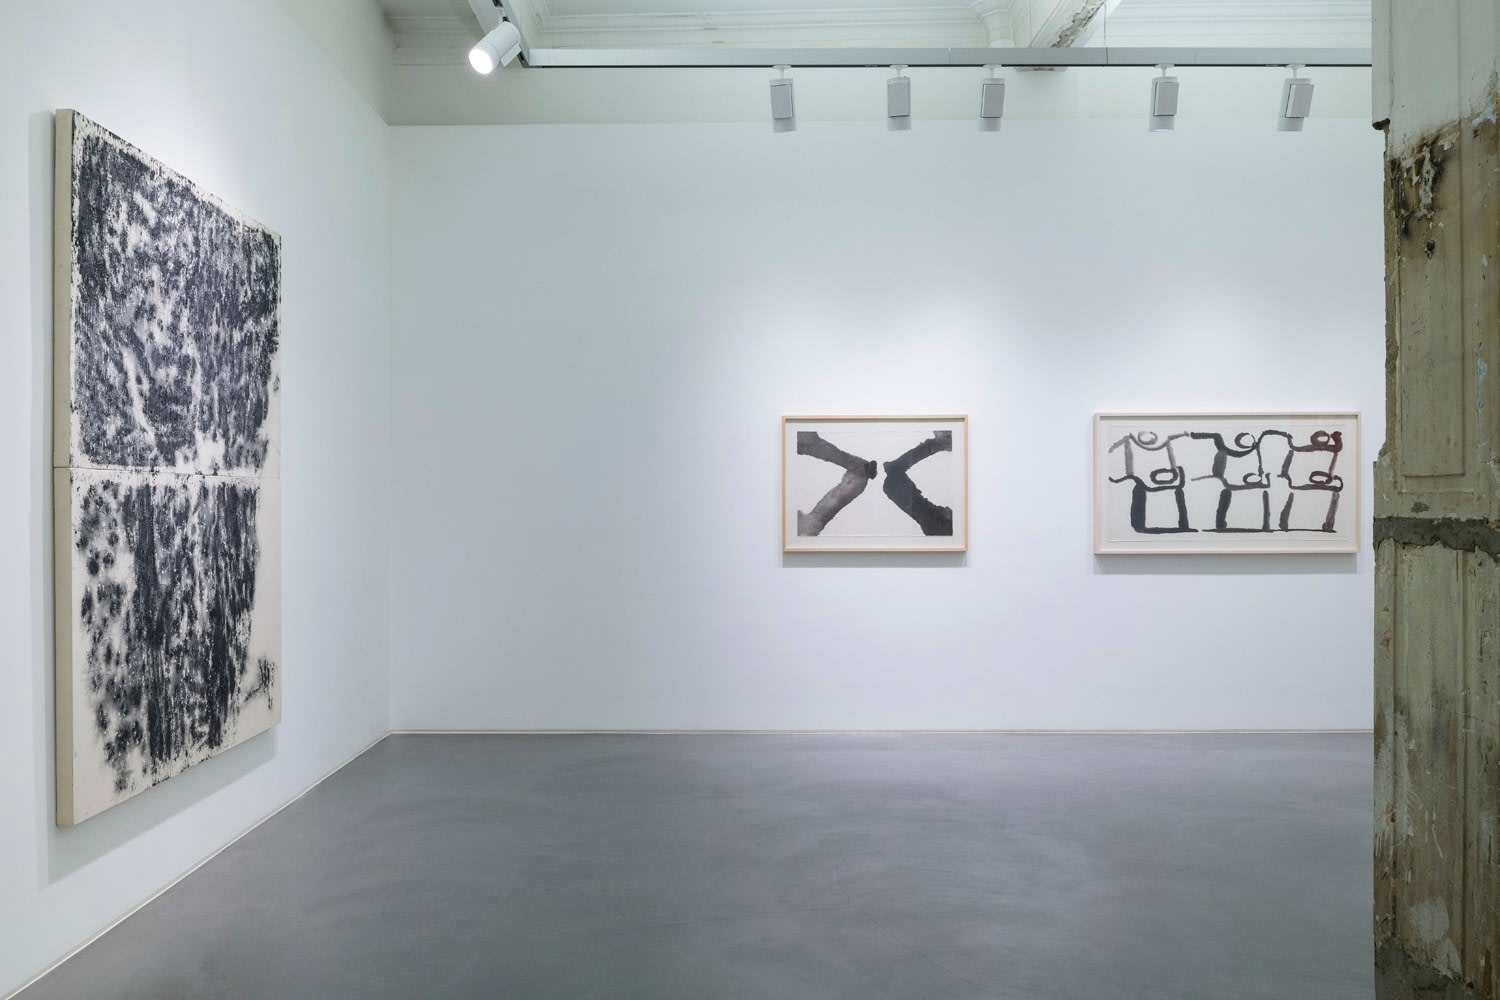 Sixth installation view of the group exhibition be/longing at Lehmann Maupin Hong Kong